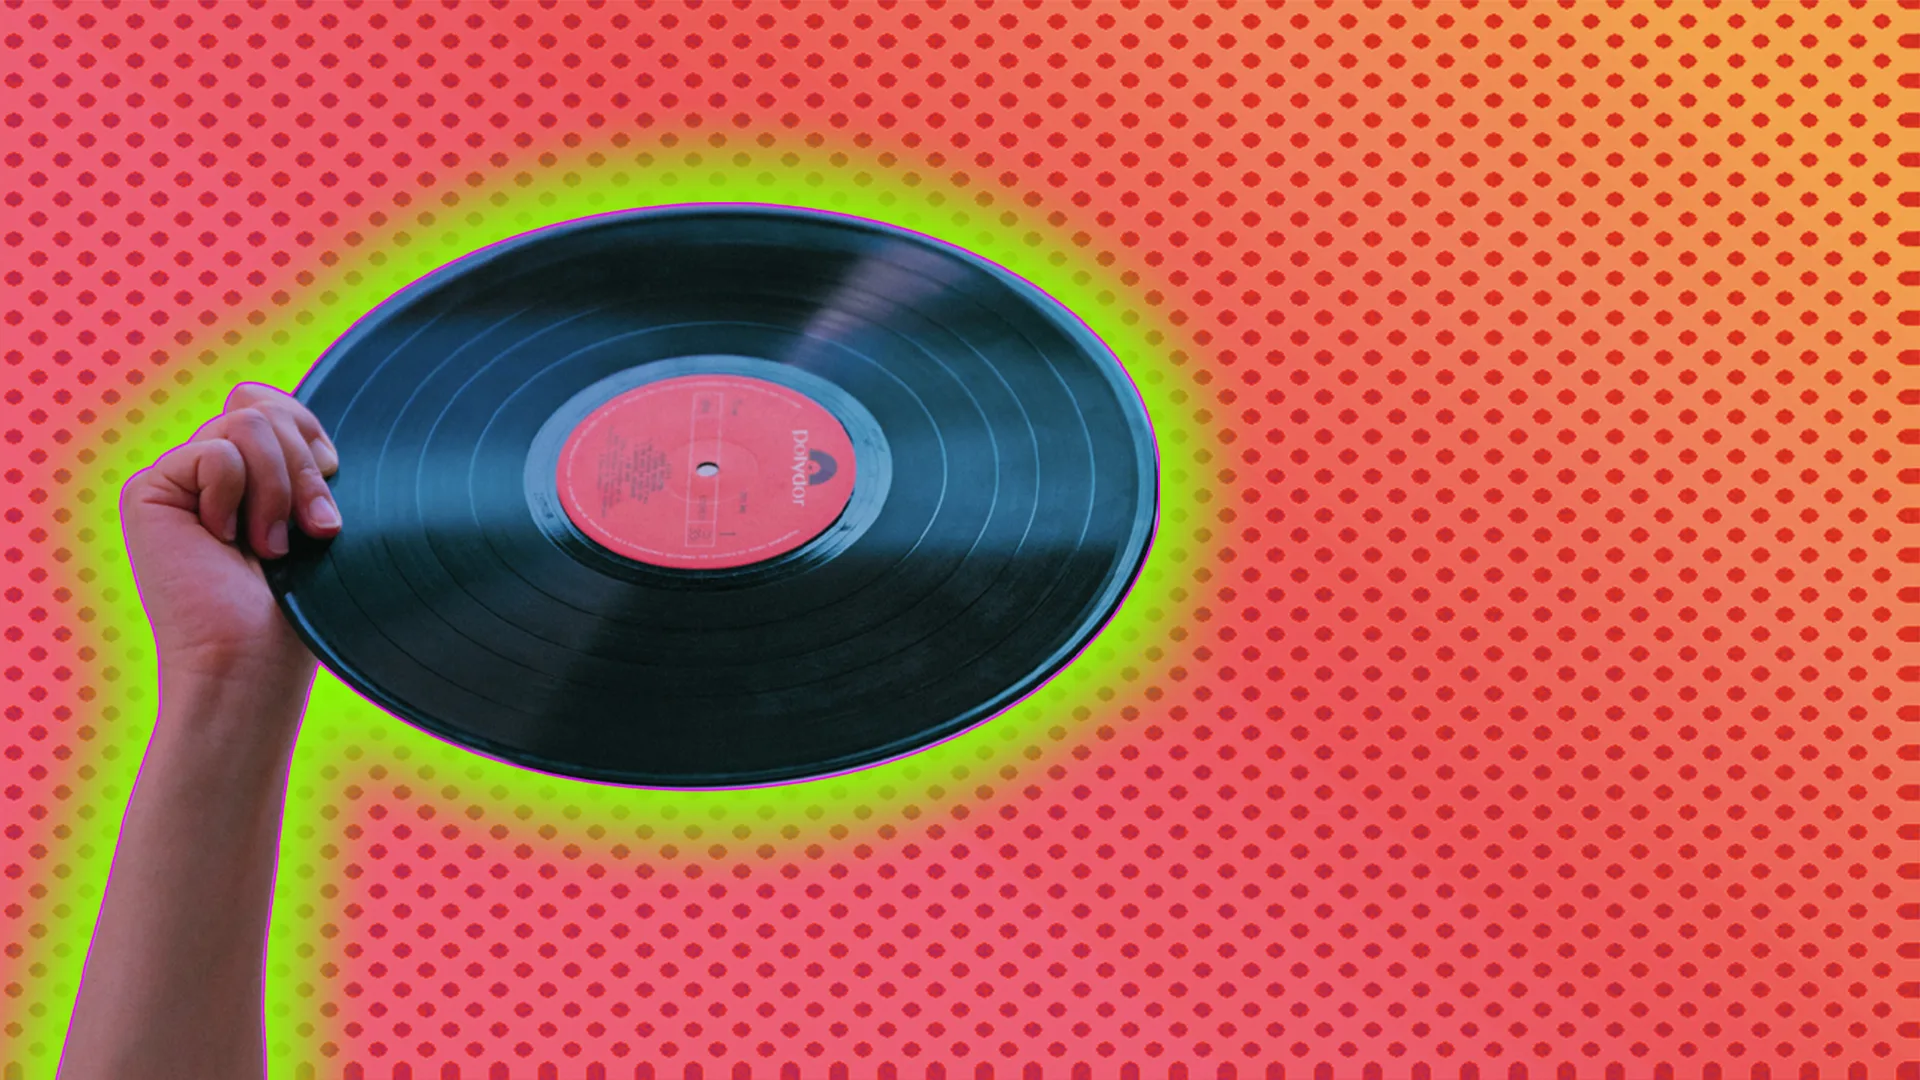 Hand holding vinyl record outlined by light green halo effect on red-dotted background.